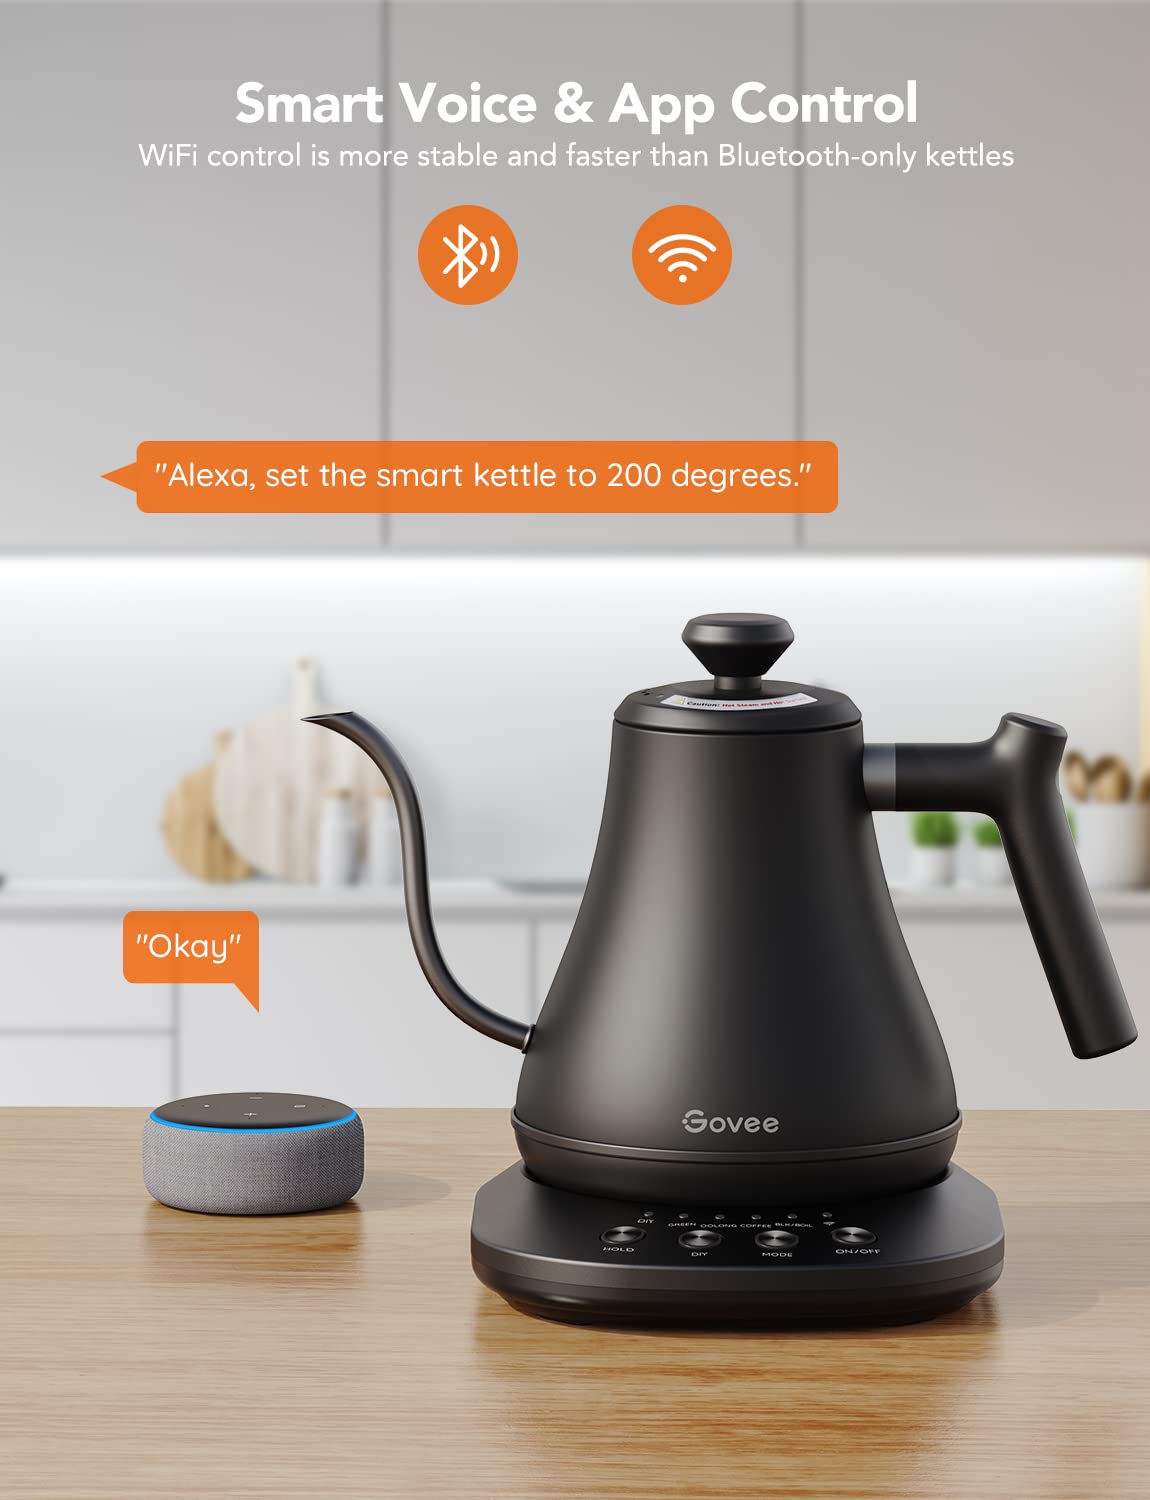 Govee Smart Electric Kettle, WiFi Variable Temperature Control Gooseneck Kettle, Pour Over Kettle and Tea Kettle, Alexa Control, 1200W Quick Heating, 100% Stainless Steel, 0.8L, Matte Black